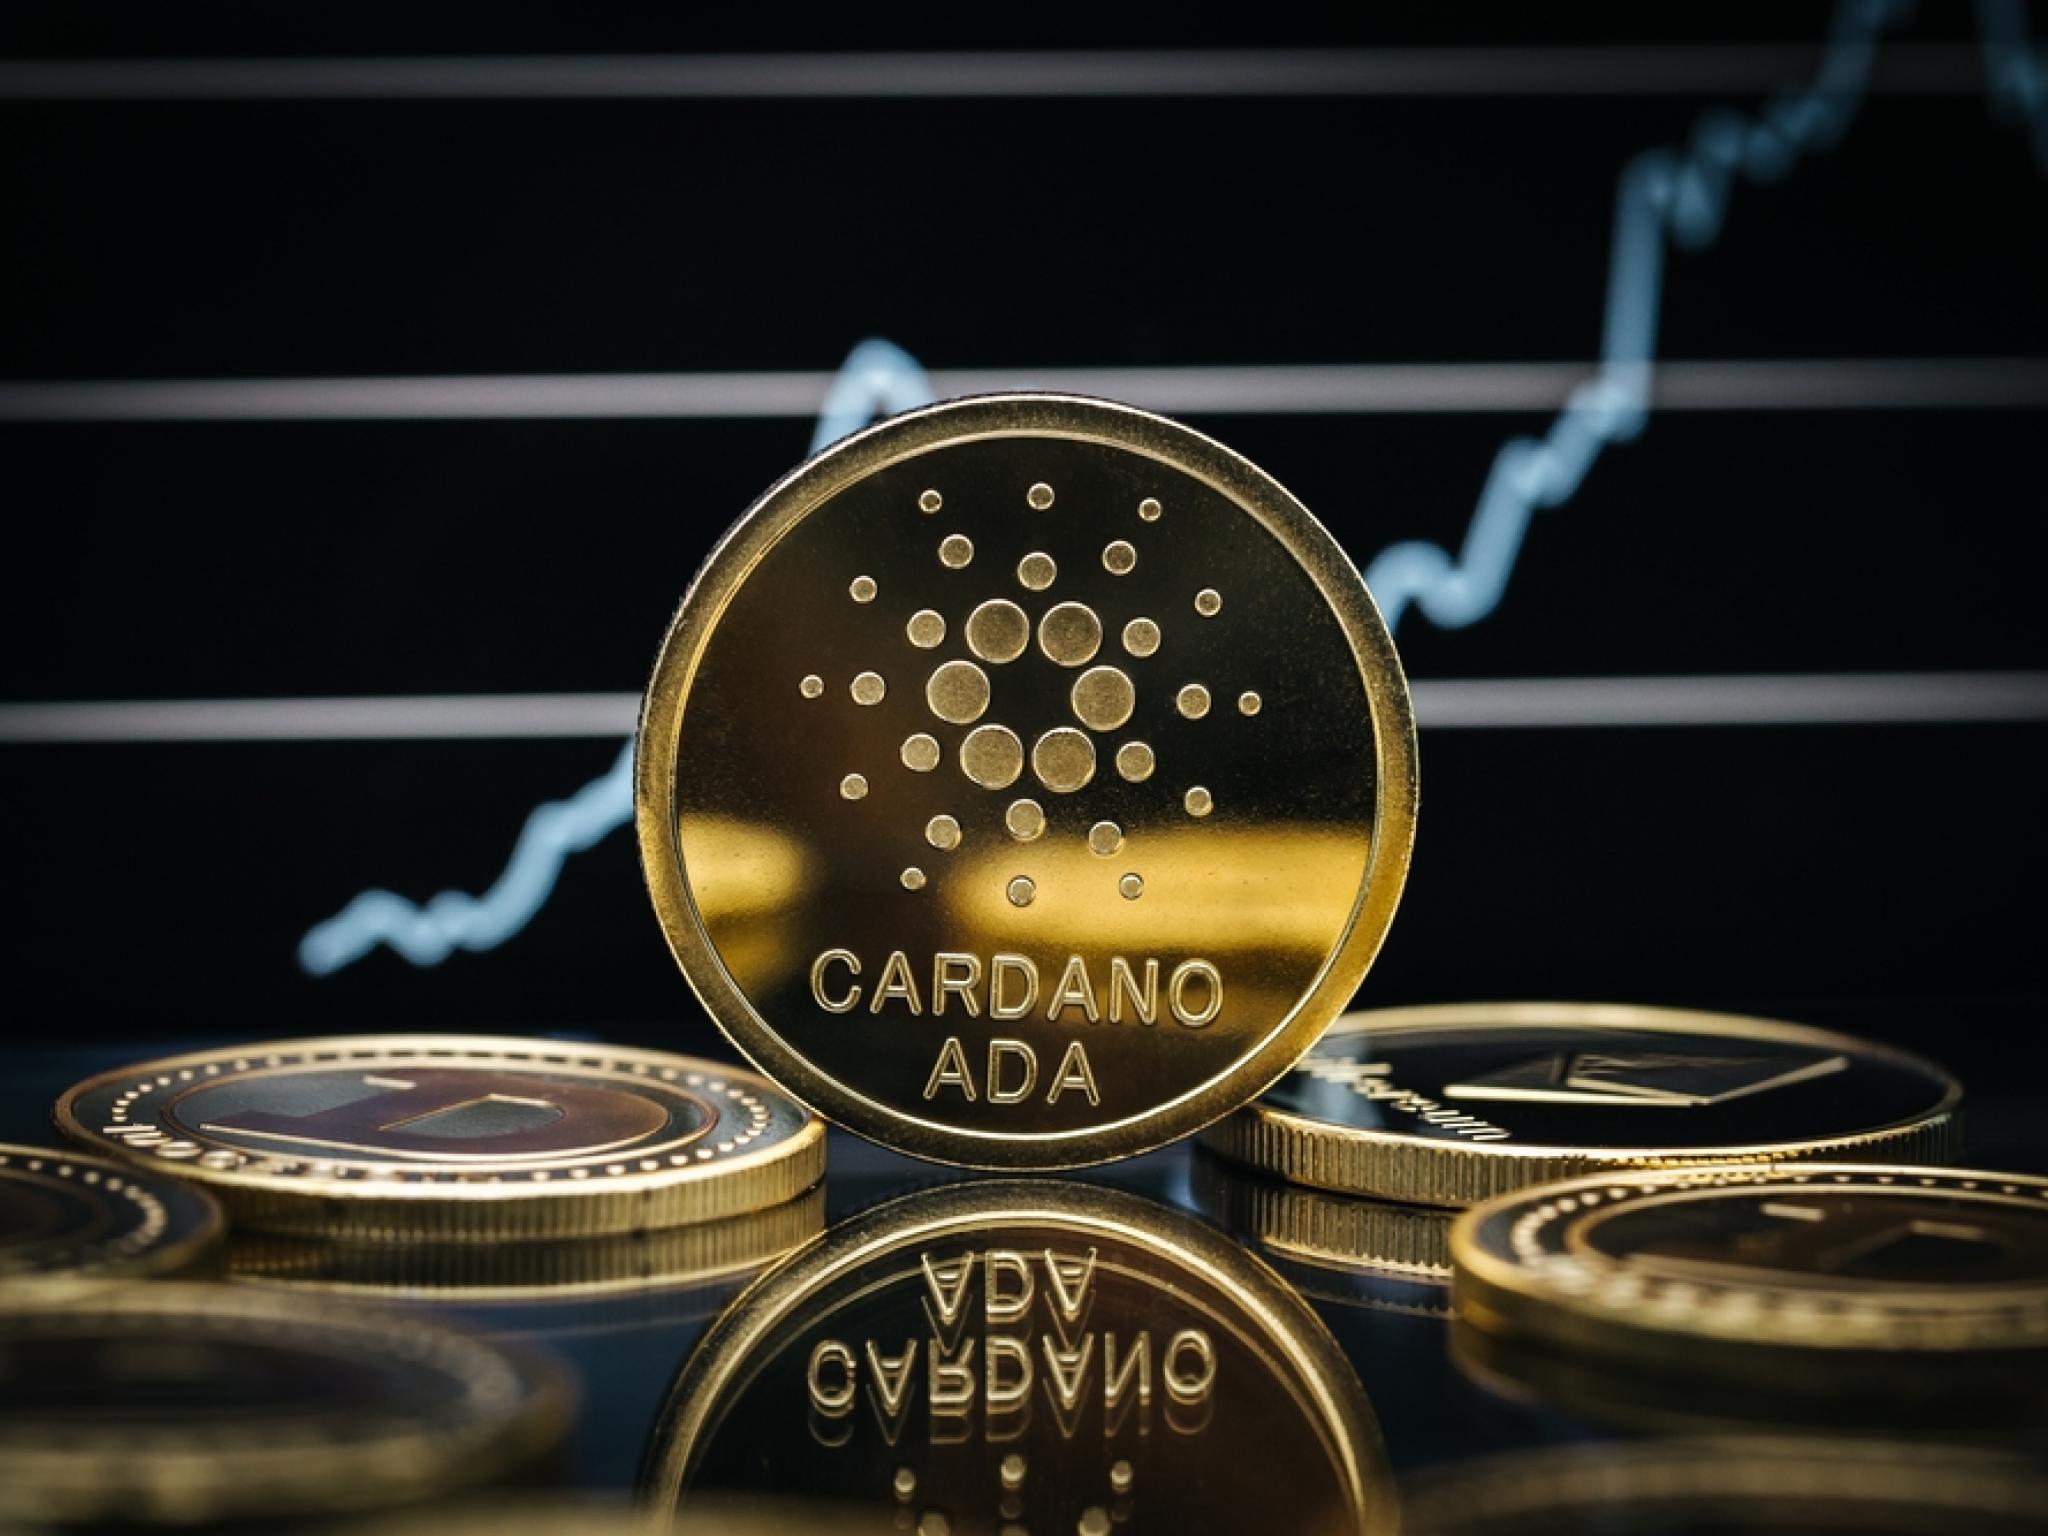  cardano-outperforms-bitcoin-ethereum-with-8-surge-analyst-says-this-key-resistance-level-could-set-the-stage-for-ada-to-rally-forward 